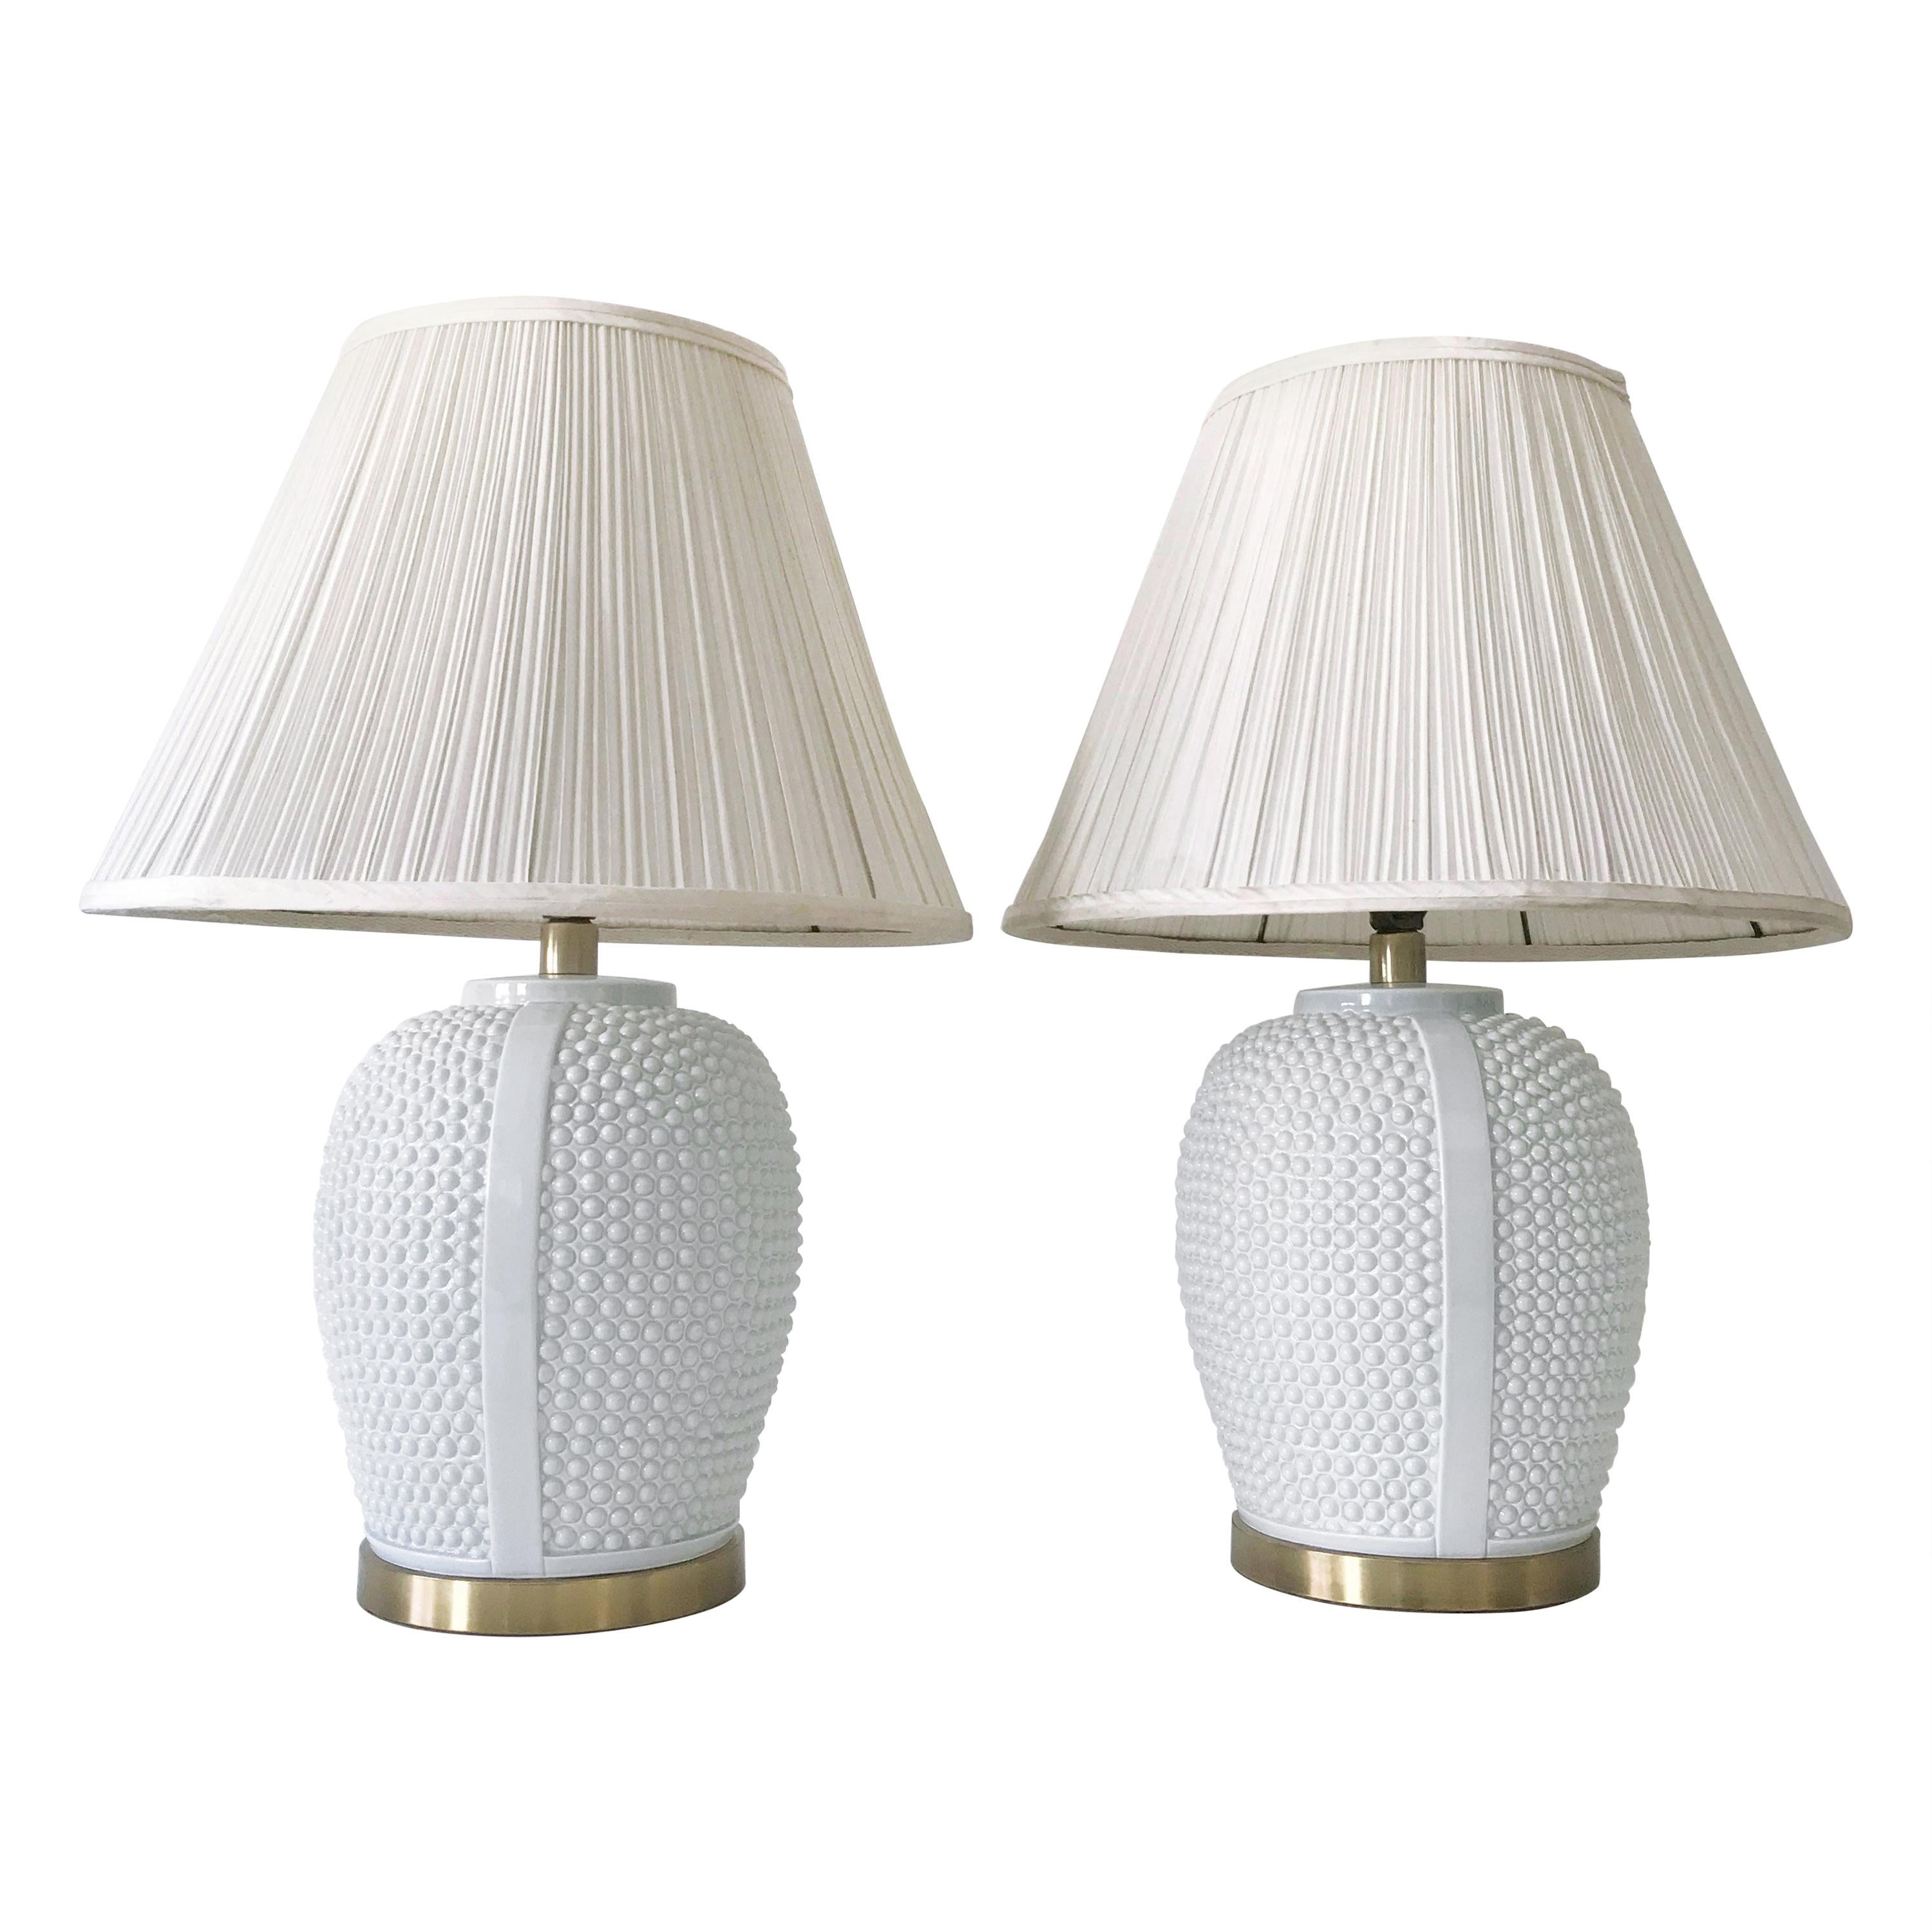 Set of Two Exceptional Mid-Century Modern Ceramic Table Lamps, 1960s, Germany